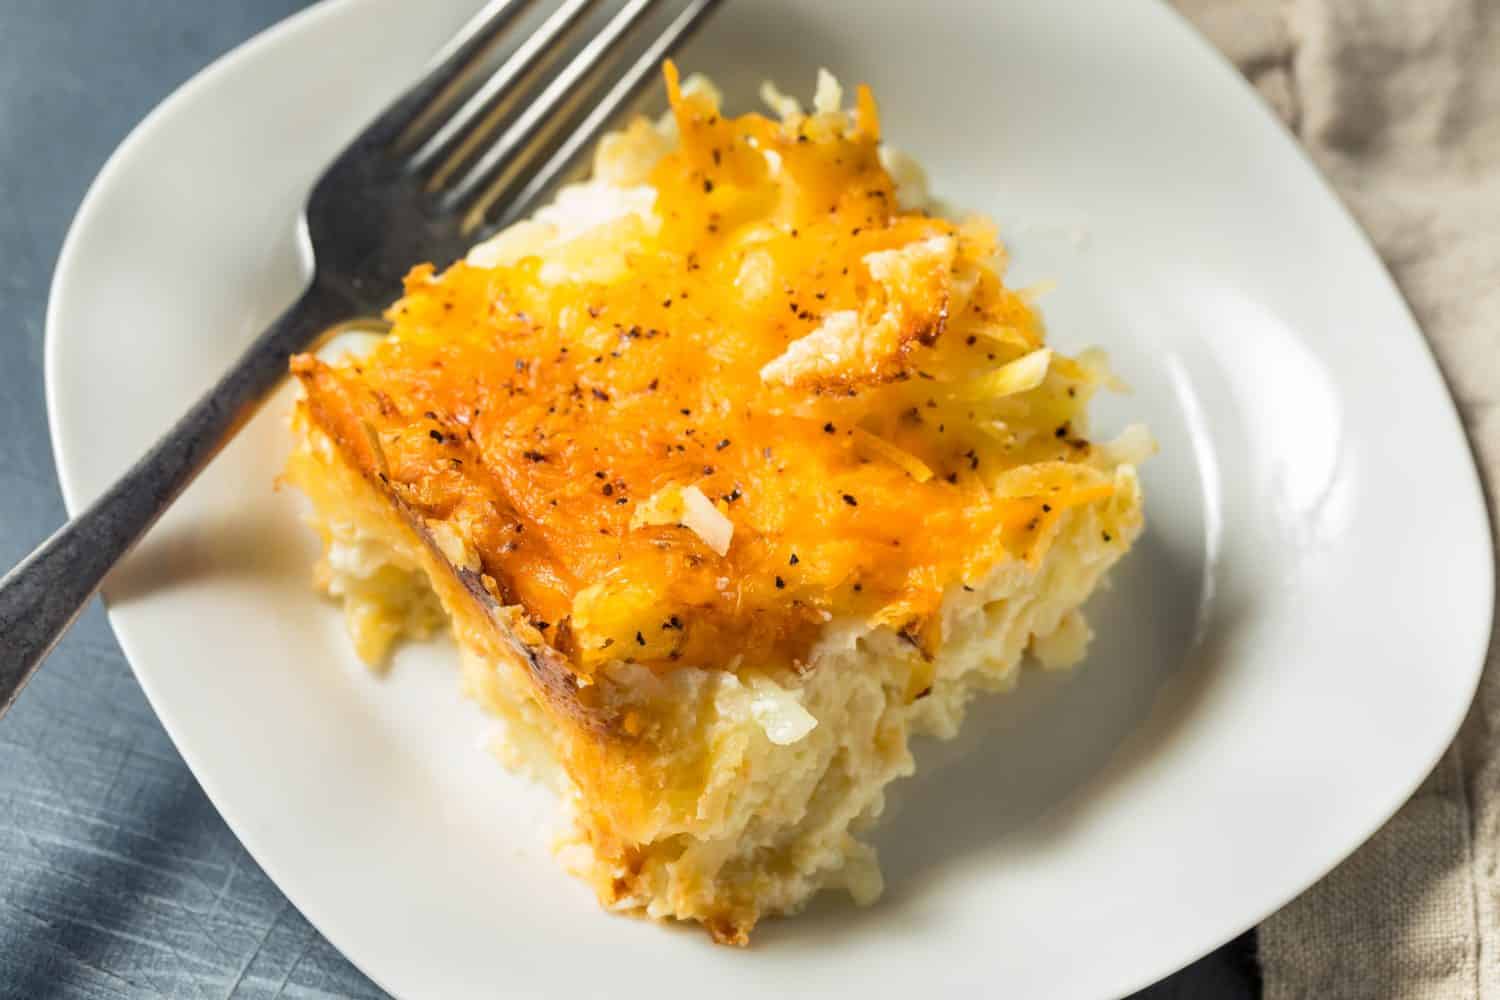 Homemade Cheesy Hashbrown Casserole with Potatoes and Cream